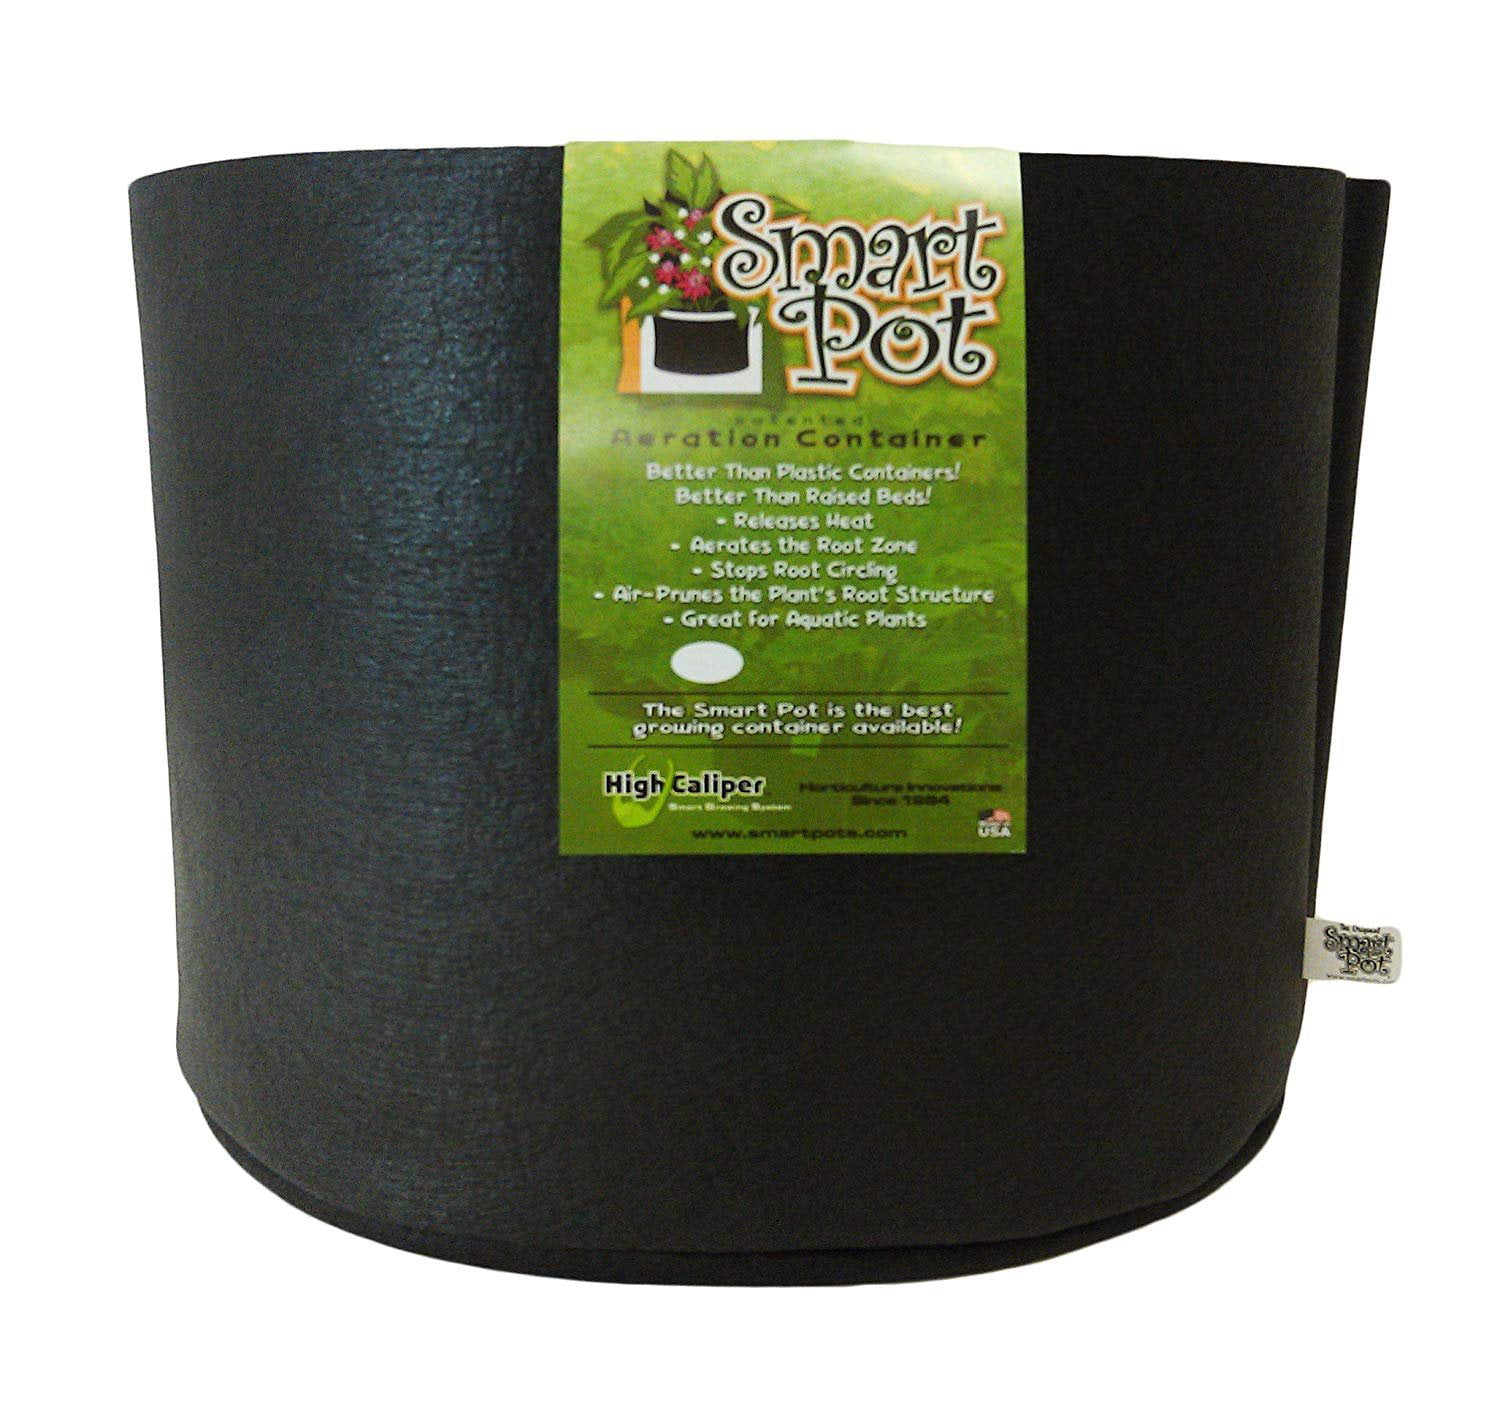 Smart Pot 10 Gallons w/ Handles plant growing container black fabric #10 